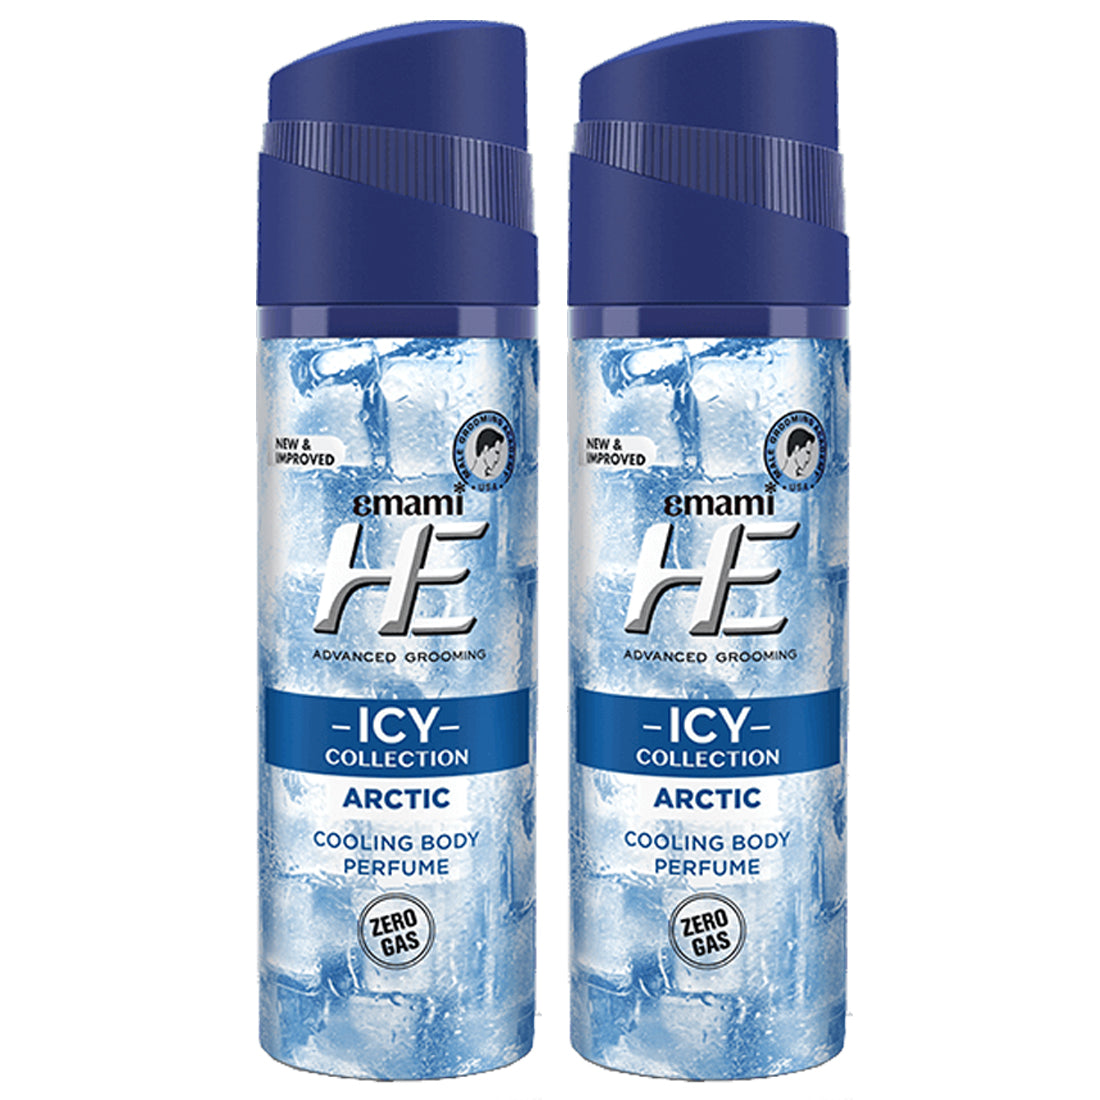 Emami HE ICY Collection Arctic Cooling Body Perfume 120ml Pack Of 2